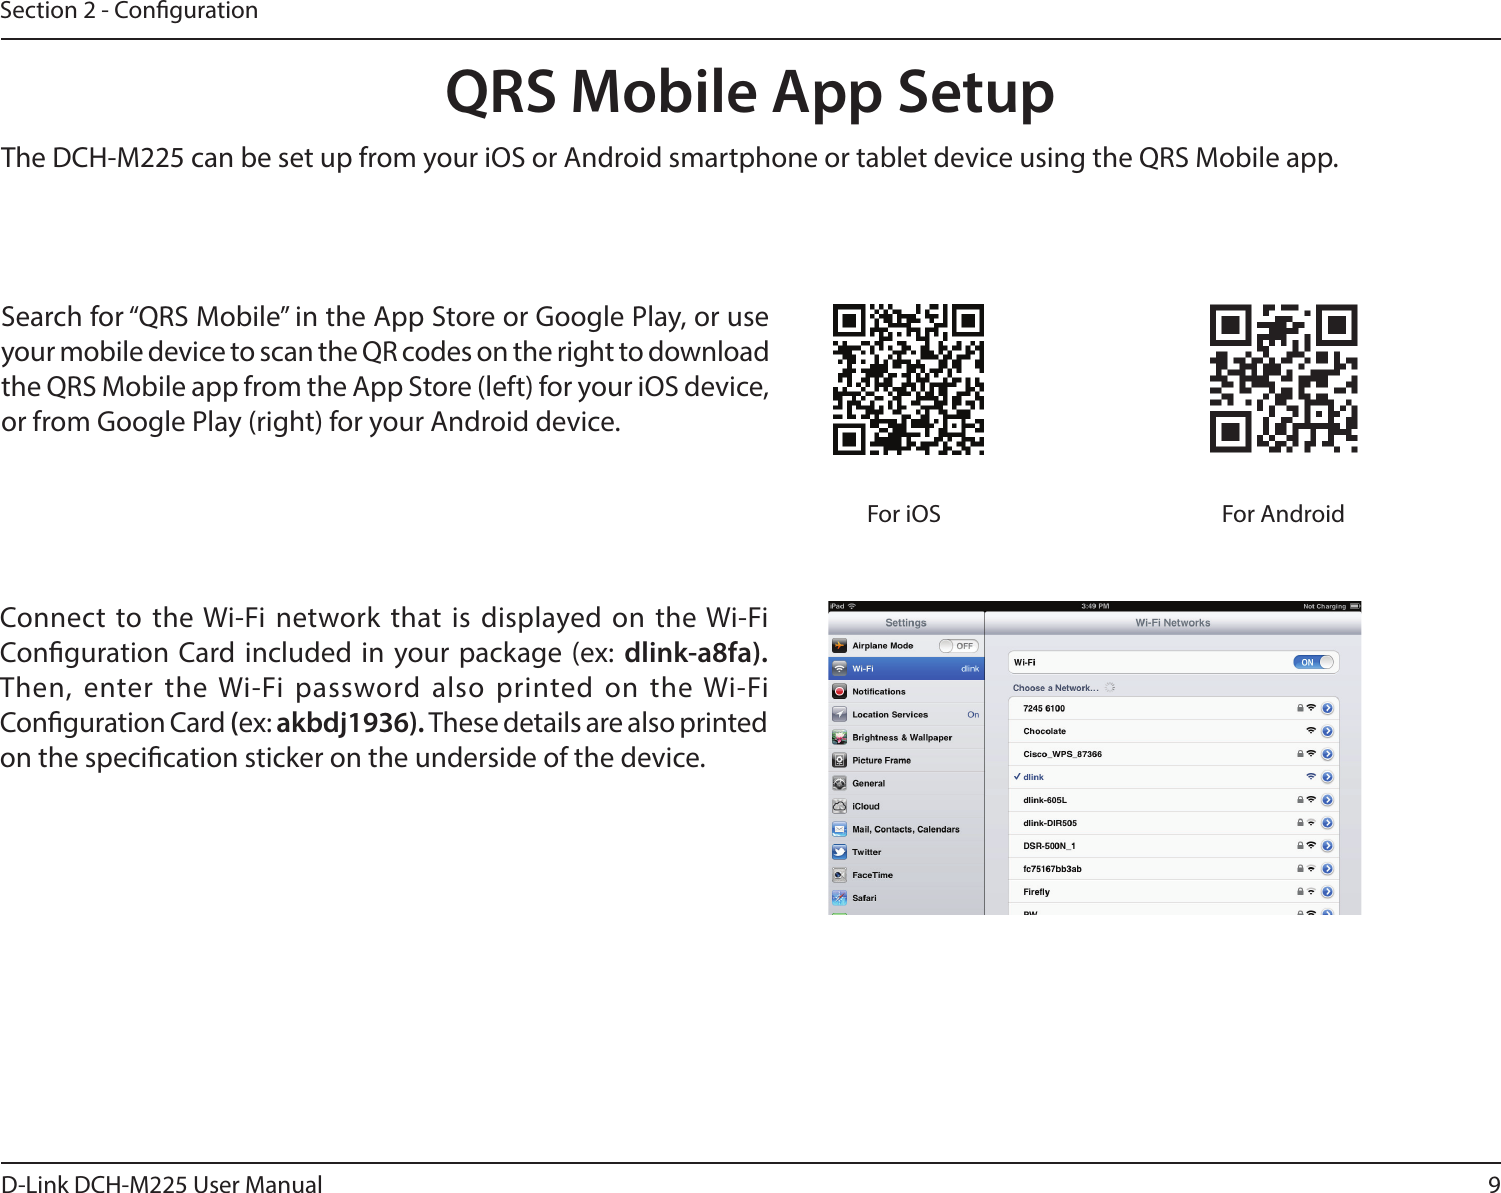 9D-Link DCH-M225 User ManualSection 2 - CongurationQRS Mobile App SetupSearch for “QRS Mobile” in the App Store or Google Play, or use your mobile device to scan the QR codes on the right to download the QRS Mobile app from the App Store (left) for your iOS device, or from Google Play (right) for your Android device.For iOS For AndroidConnect to the Wi-Fi network that is  displayed on the Wi-Fi Conguration Card included in your package (ex:  dlink-a8fa).  Then, enter the Wi-Fi  password also  printed on the Wi-Fi Conguration Card (ex: akbdj1936). These details are also printed on the specication sticker on the underside of the device.The DCH-M225 can be set up from your iOS or Android smartphone or tablet device using the QRS Mobile app.